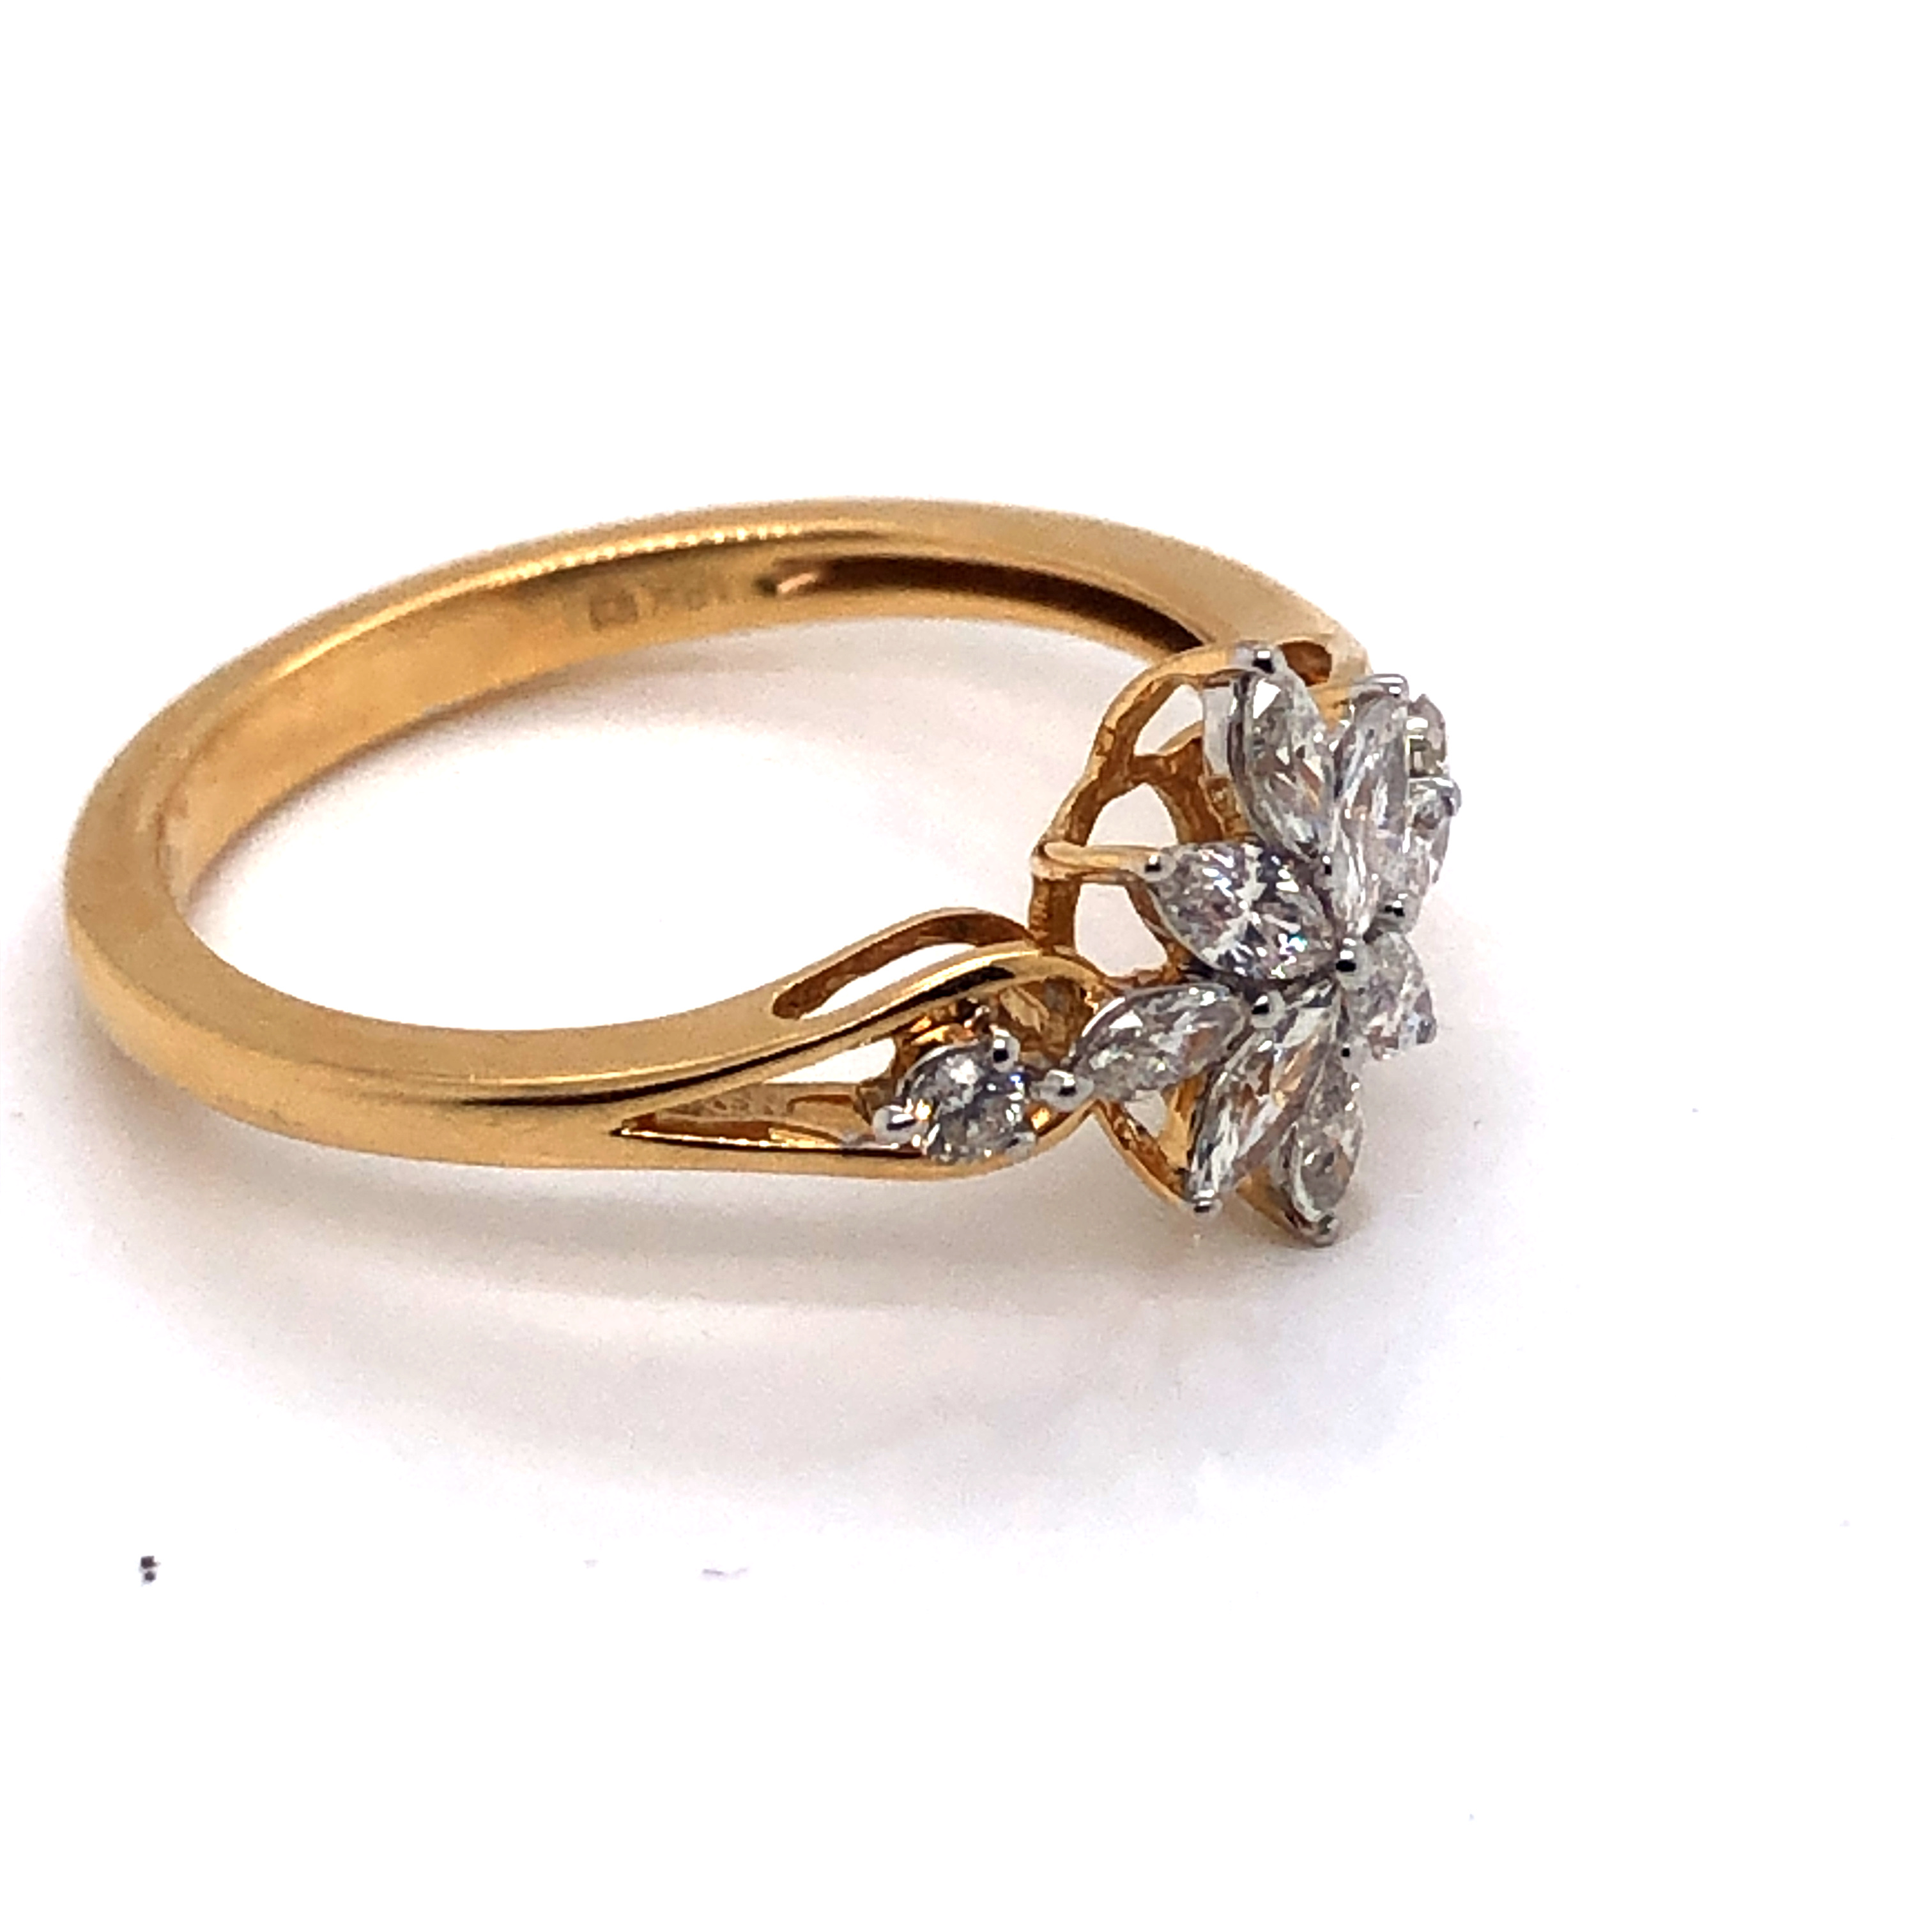 A DIAMOND FLORAL CLUSTER RING. THE FLORAL DESIGN CONSISTING OF EIGHT MARQUISE CUT DIAMONDS WITH - Image 2 of 3